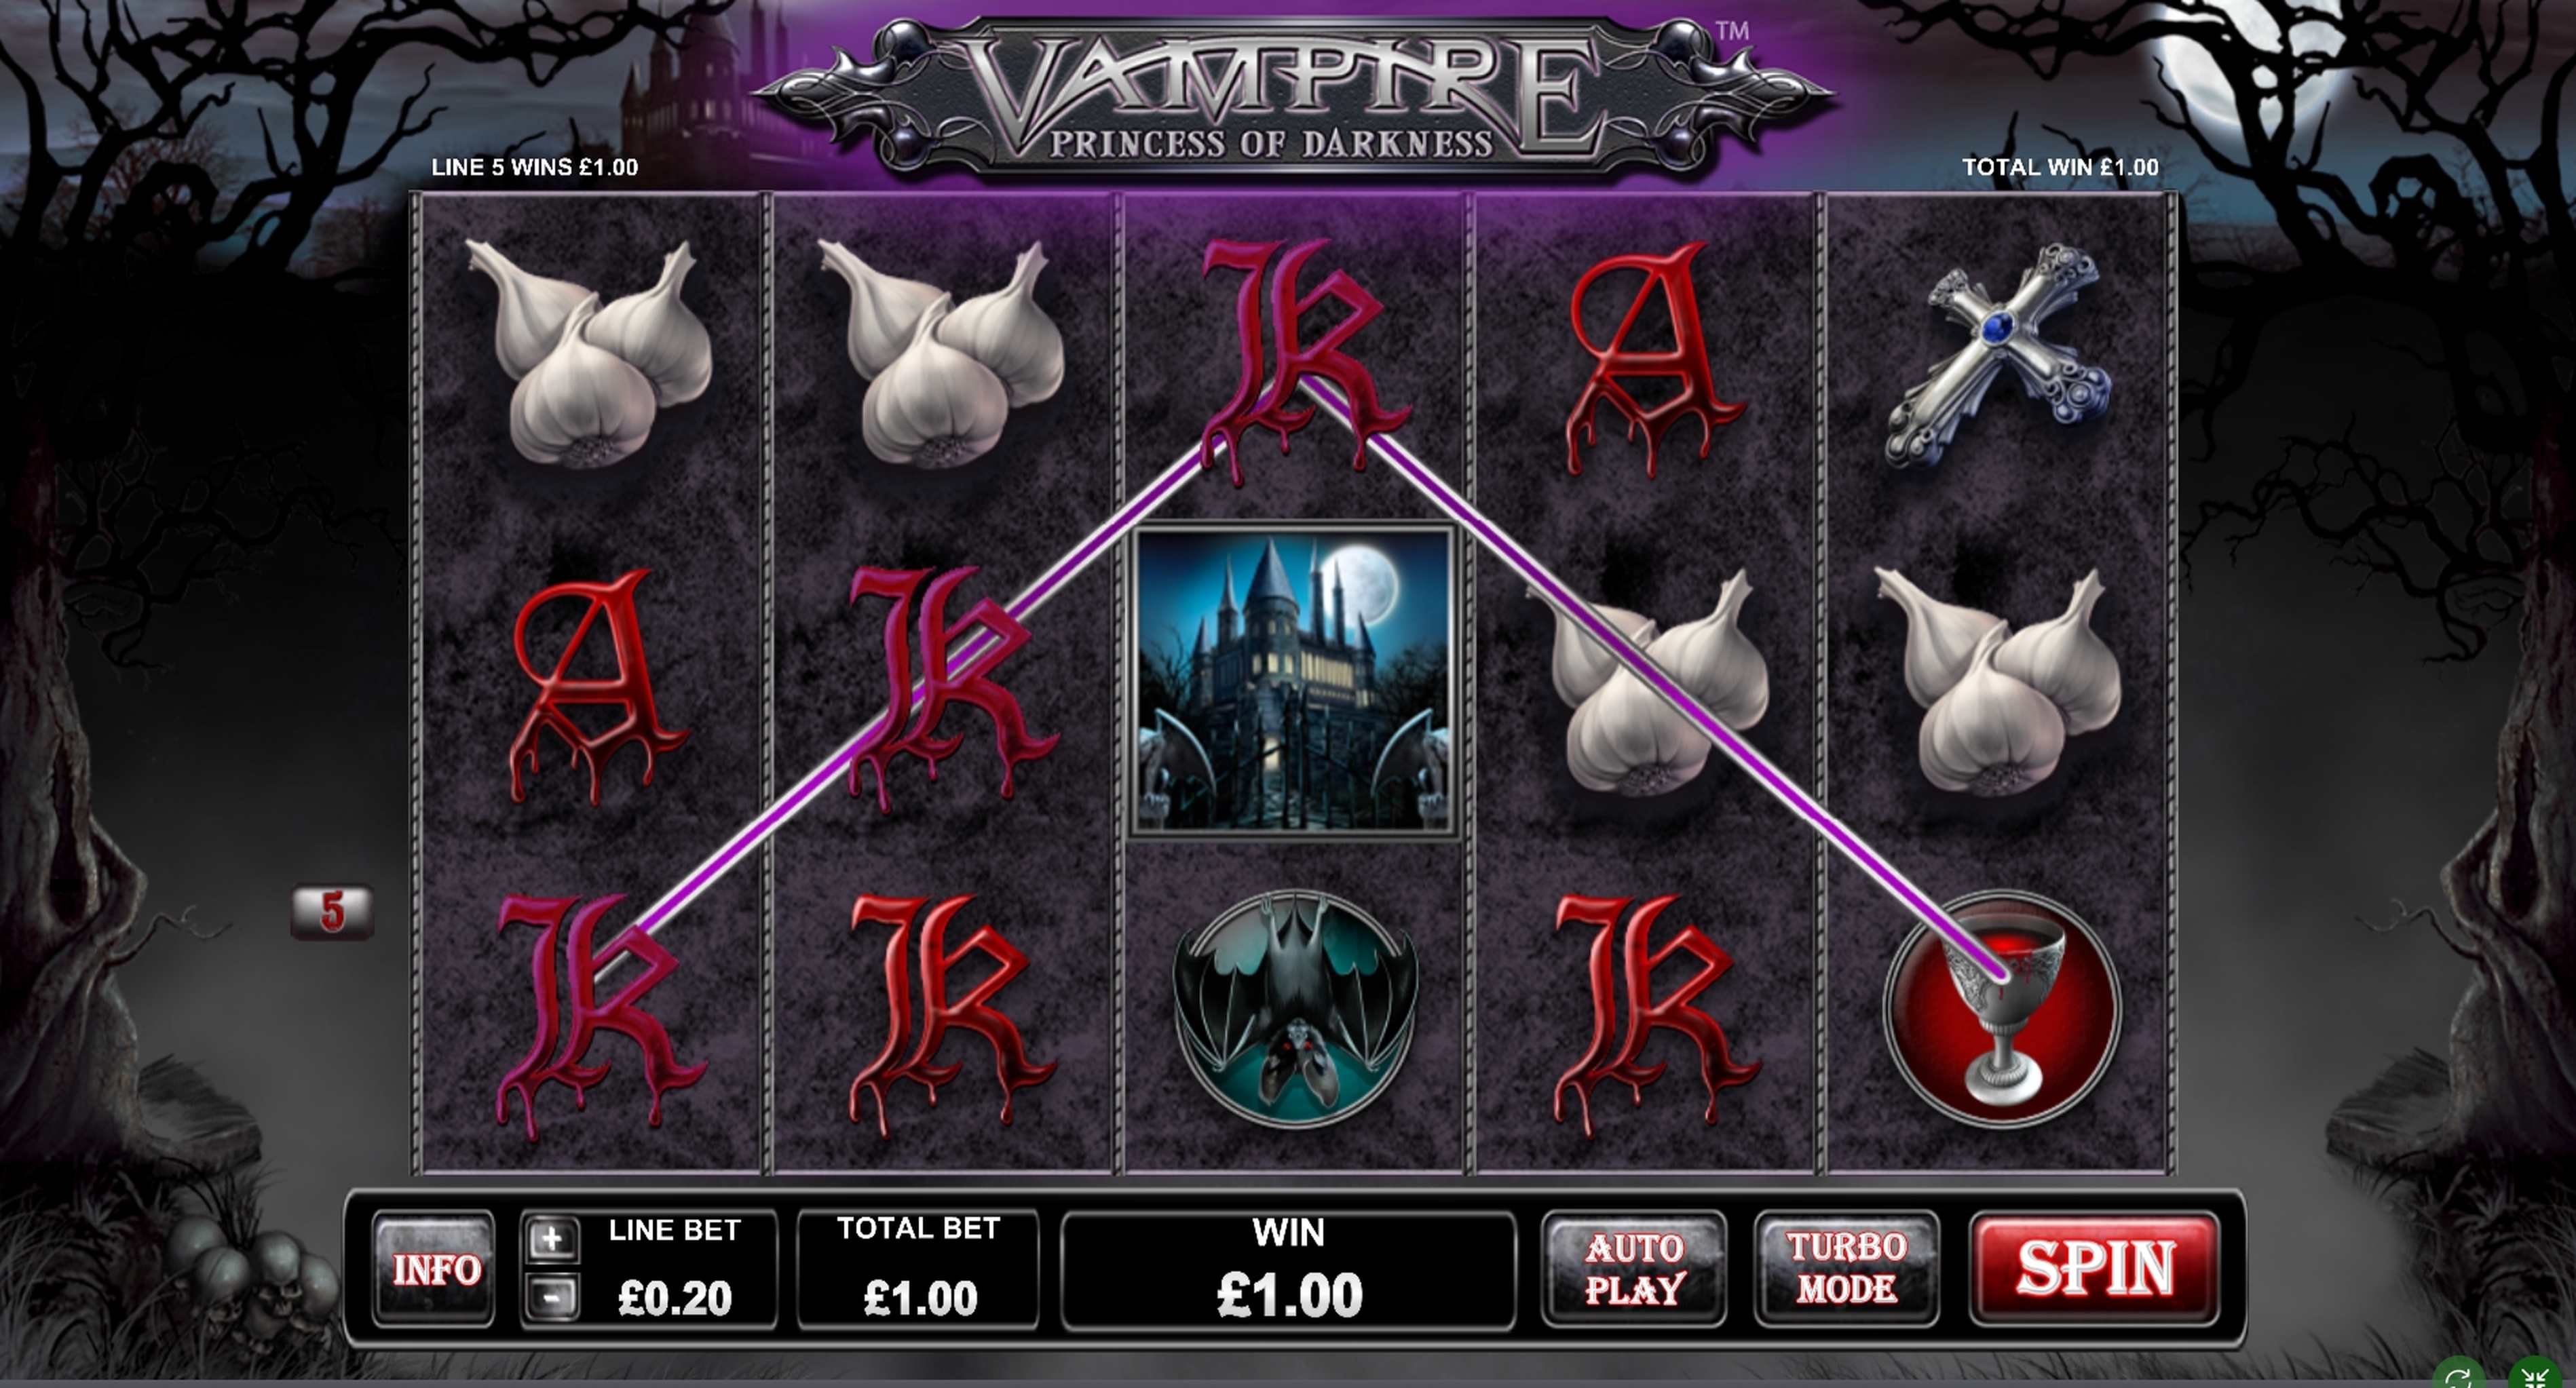 Win Money in Vampire Princess of Darkness Free Slot Game by Playtech